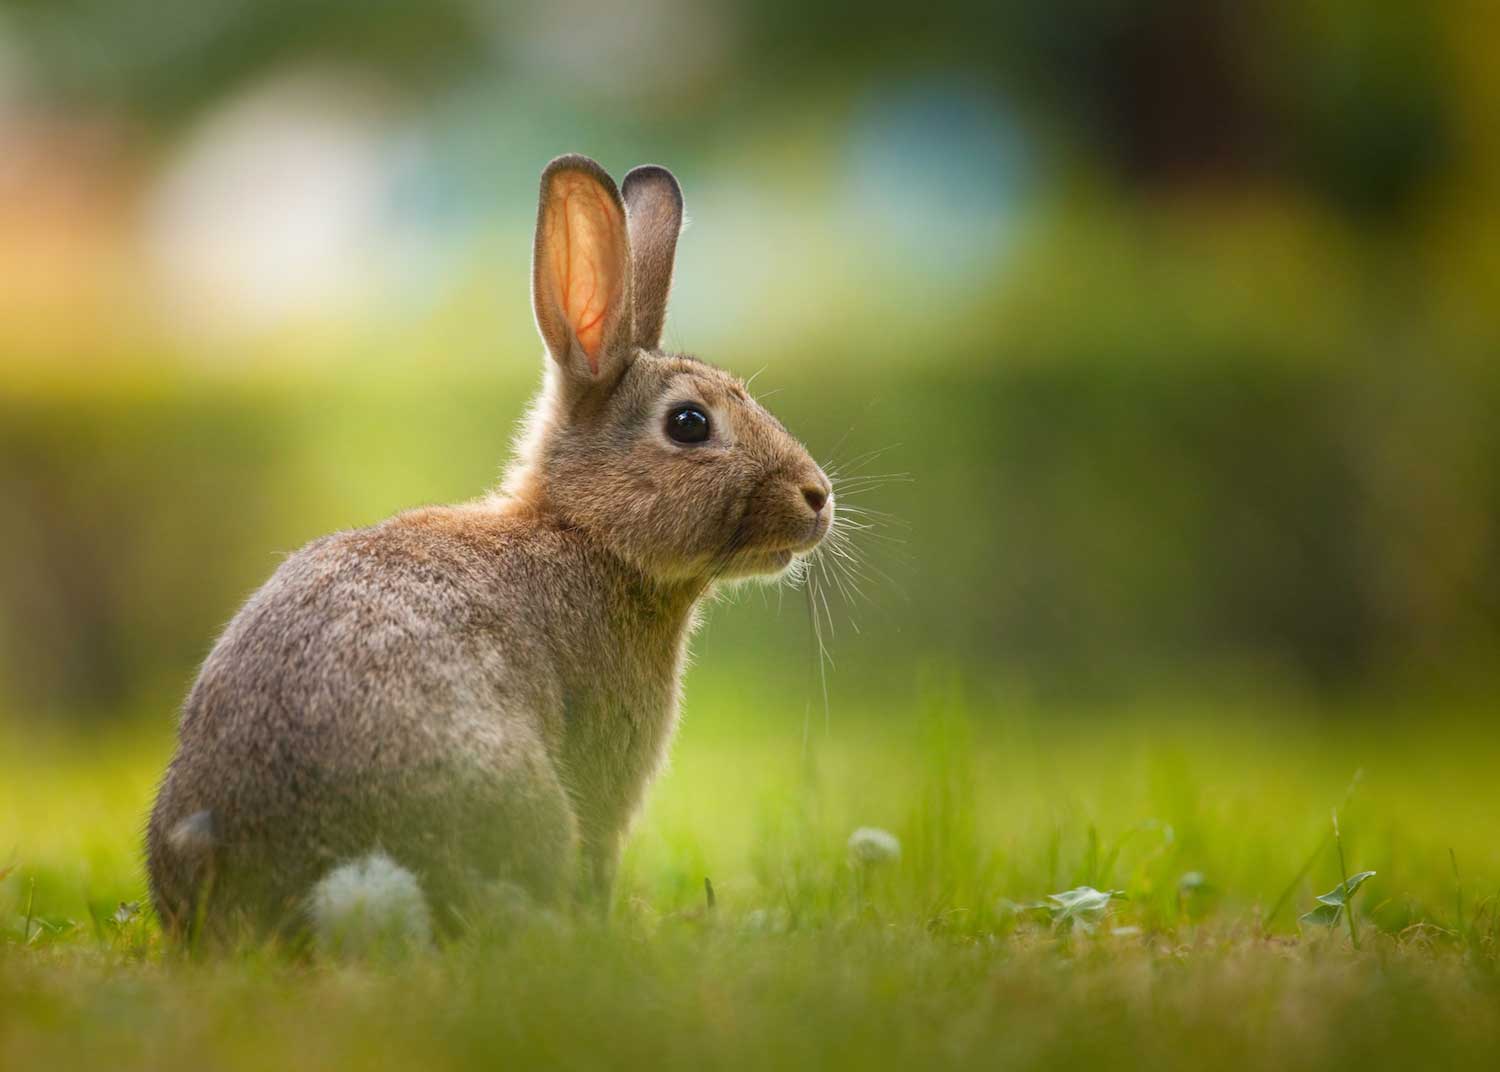 An eastern cottontail rabbit sitting in the grass.